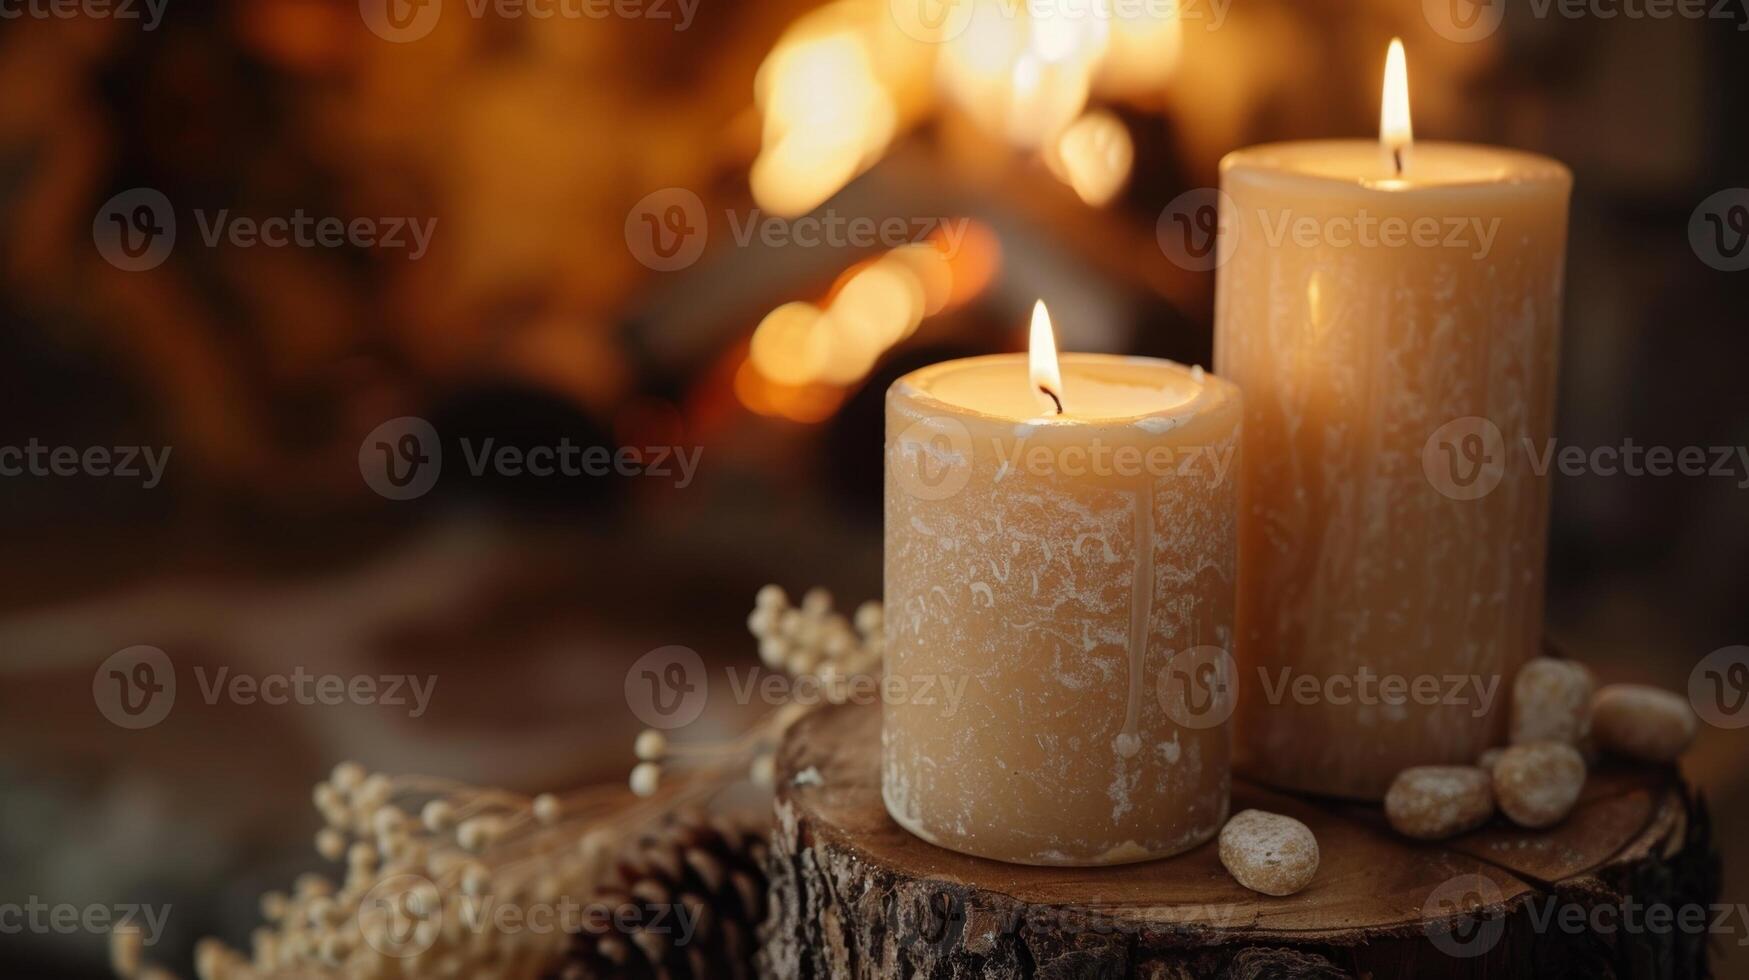 Delicious aromas waft through the air mingling with the scents of nature and warmth provided by the candles and the fire. 2d flat cartoon photo